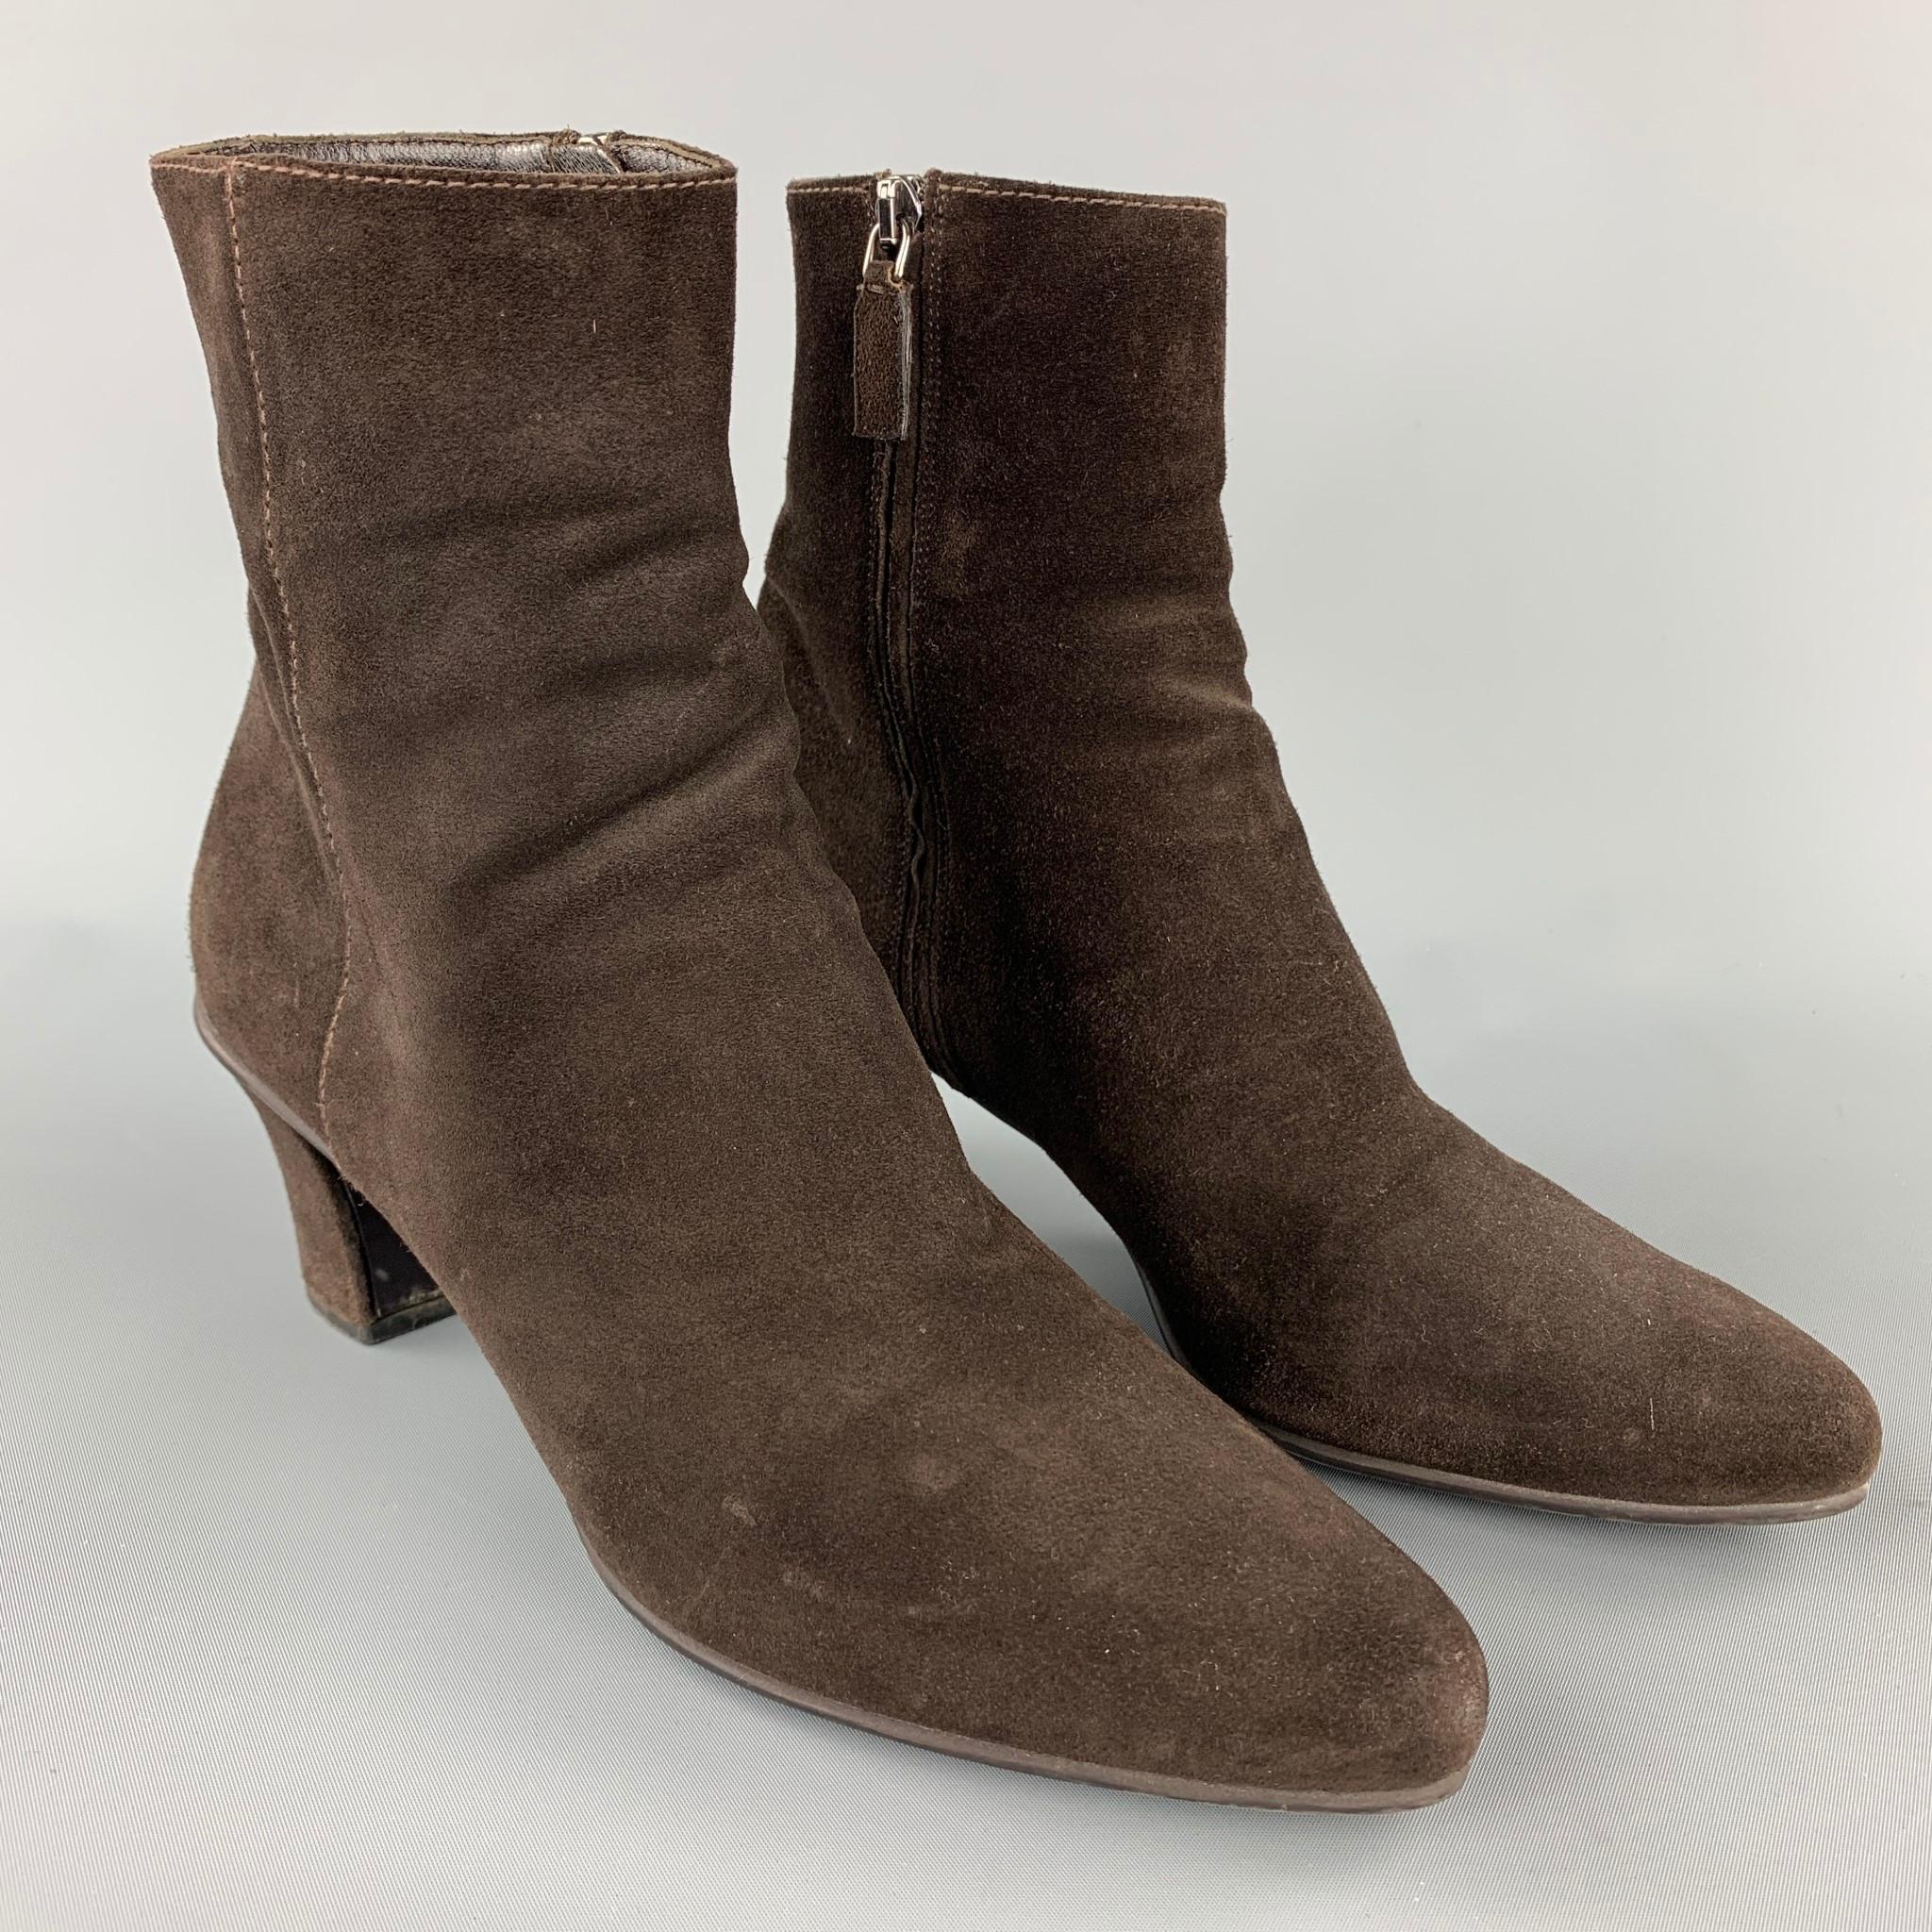 PRADA ankle boots comes in a brown suede featuring a chunky heel and a side zip up closure. Made in Italy.

Very Good Pre-Owned Condition.
Marked: UK 39.5
Original Retail Price: $995.00

Measurements:

Heel: 2.5 in.